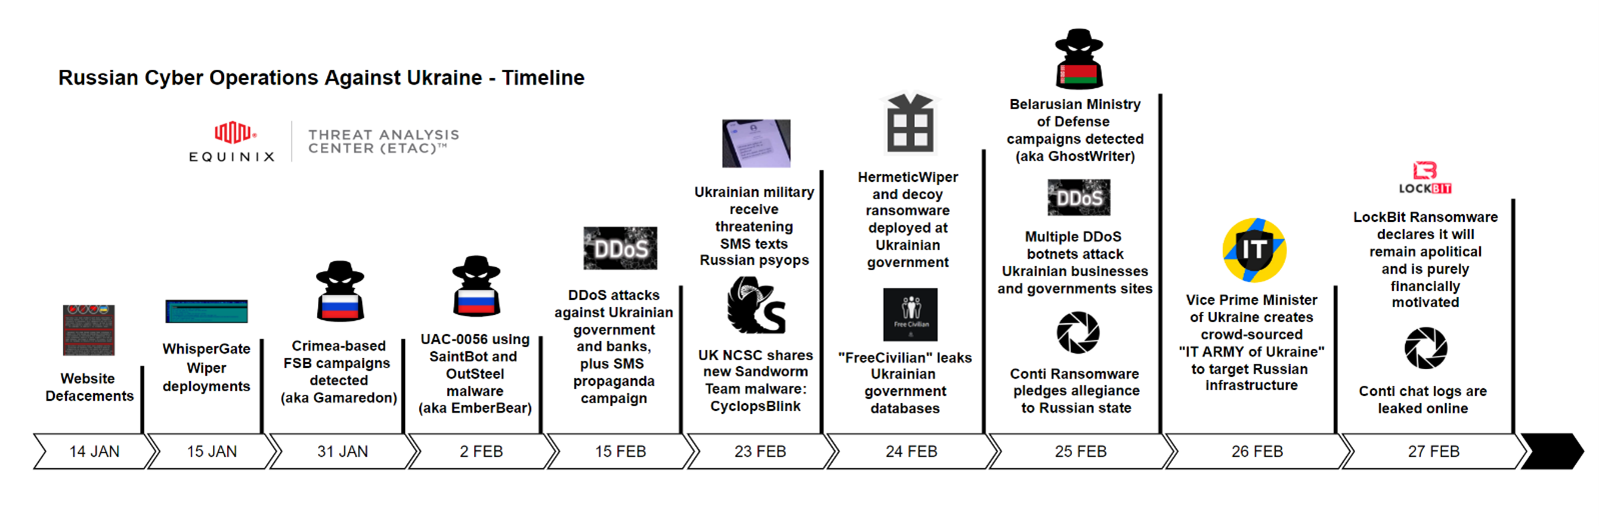 Russian Cyber Operations Against Ukraine Timeline. Source: EQUINIX